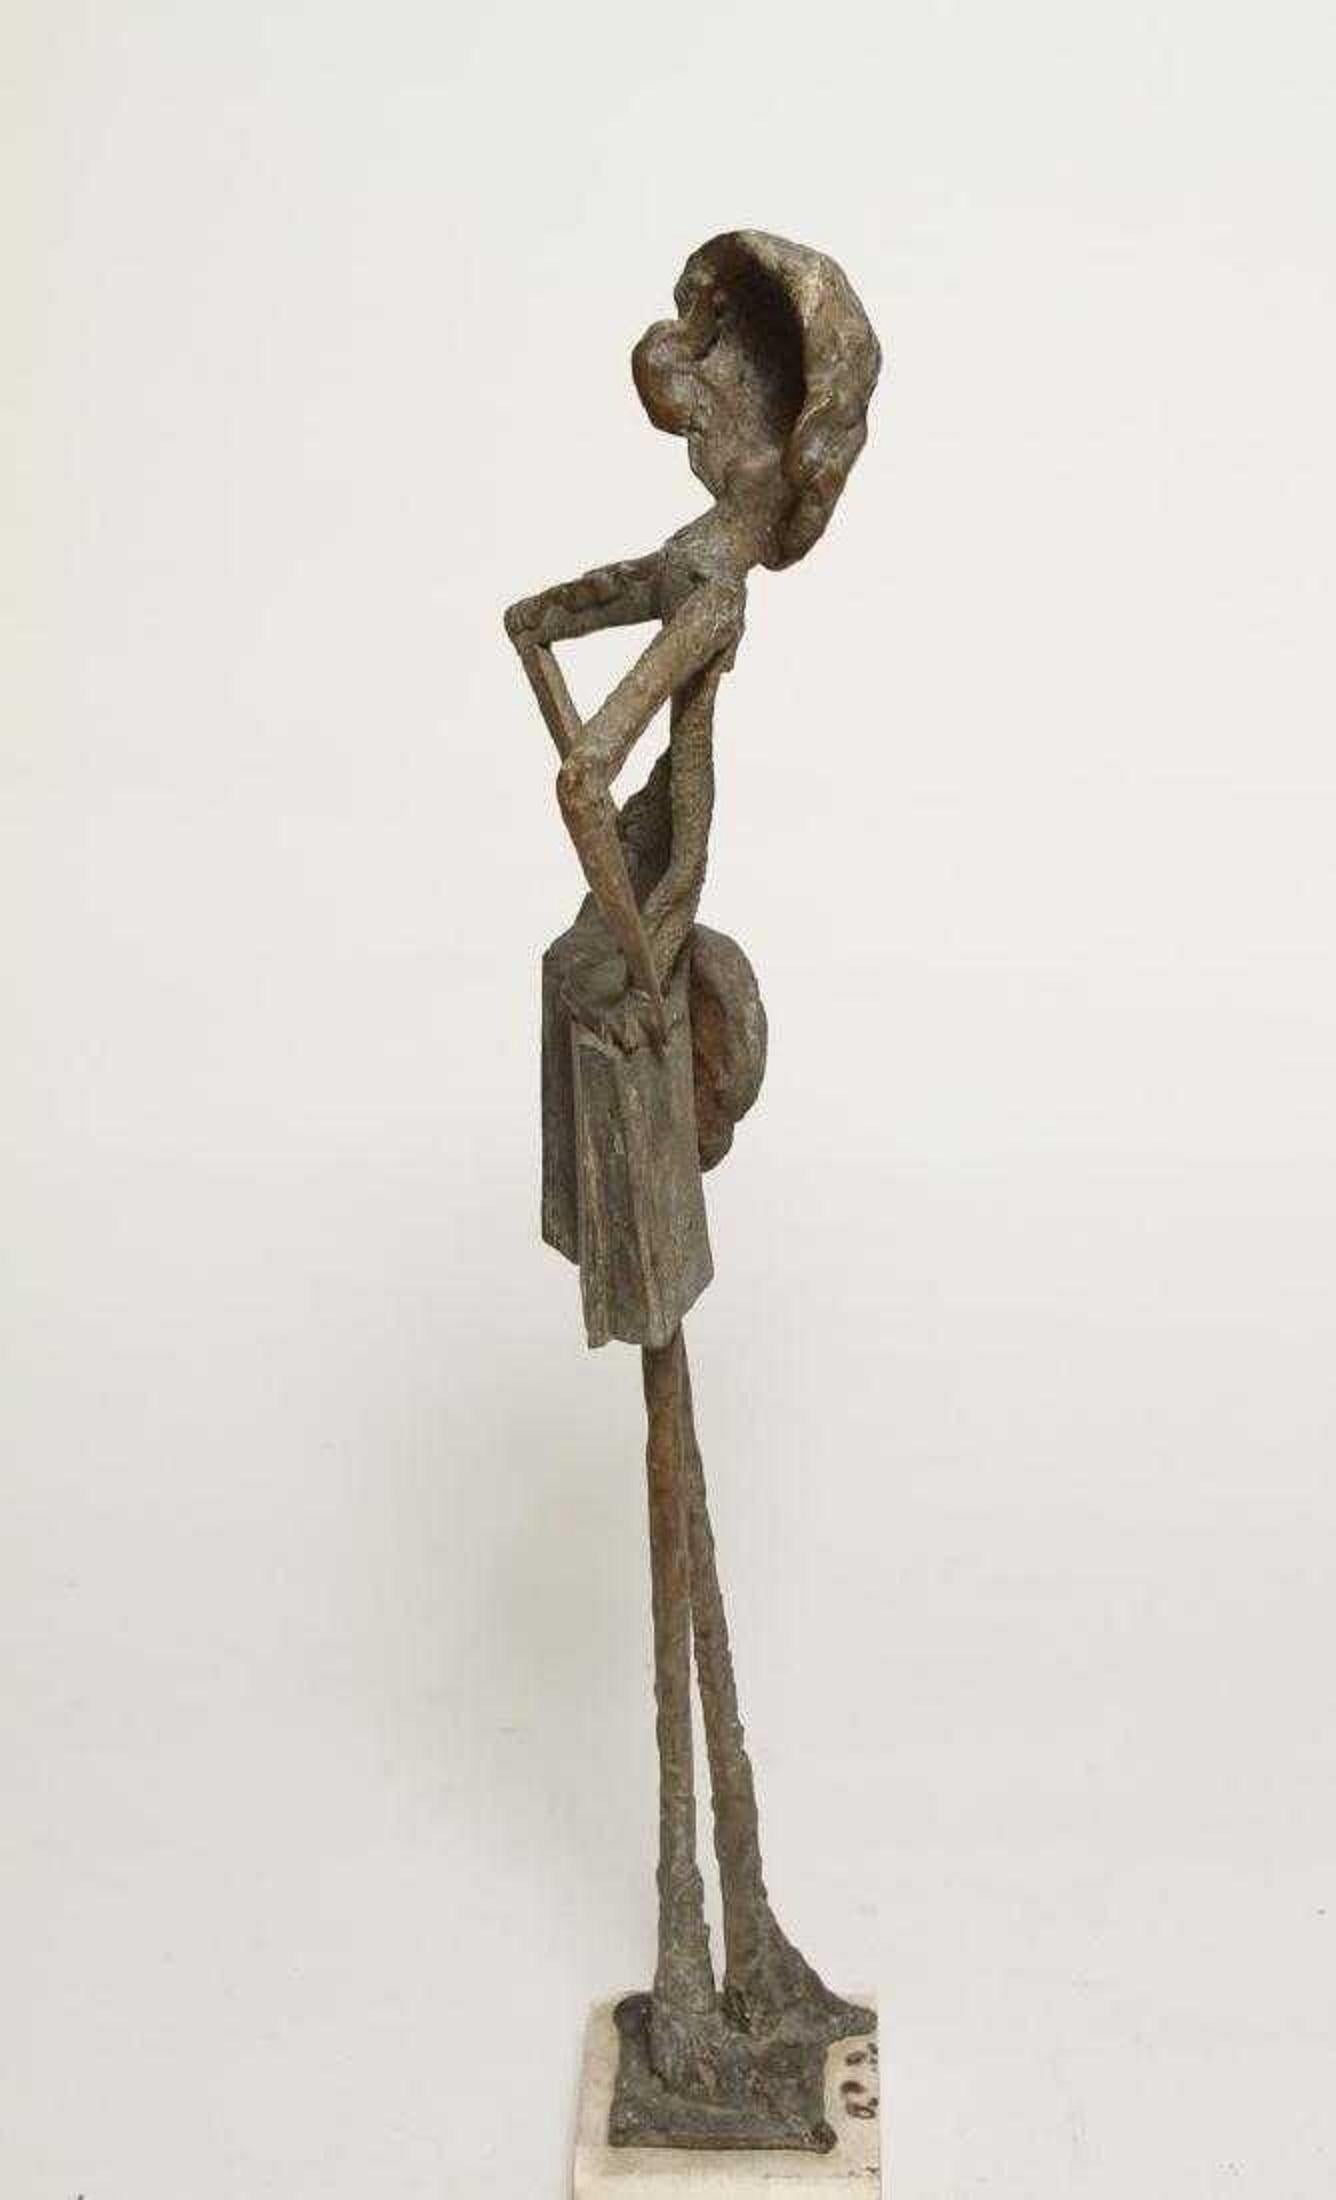 Mid-Century Modern wrought iron sculpture a person with oversize top, shorts, and carrying a hat, signed, artist's monogram and cipher, further mounted on a plaster base. 28